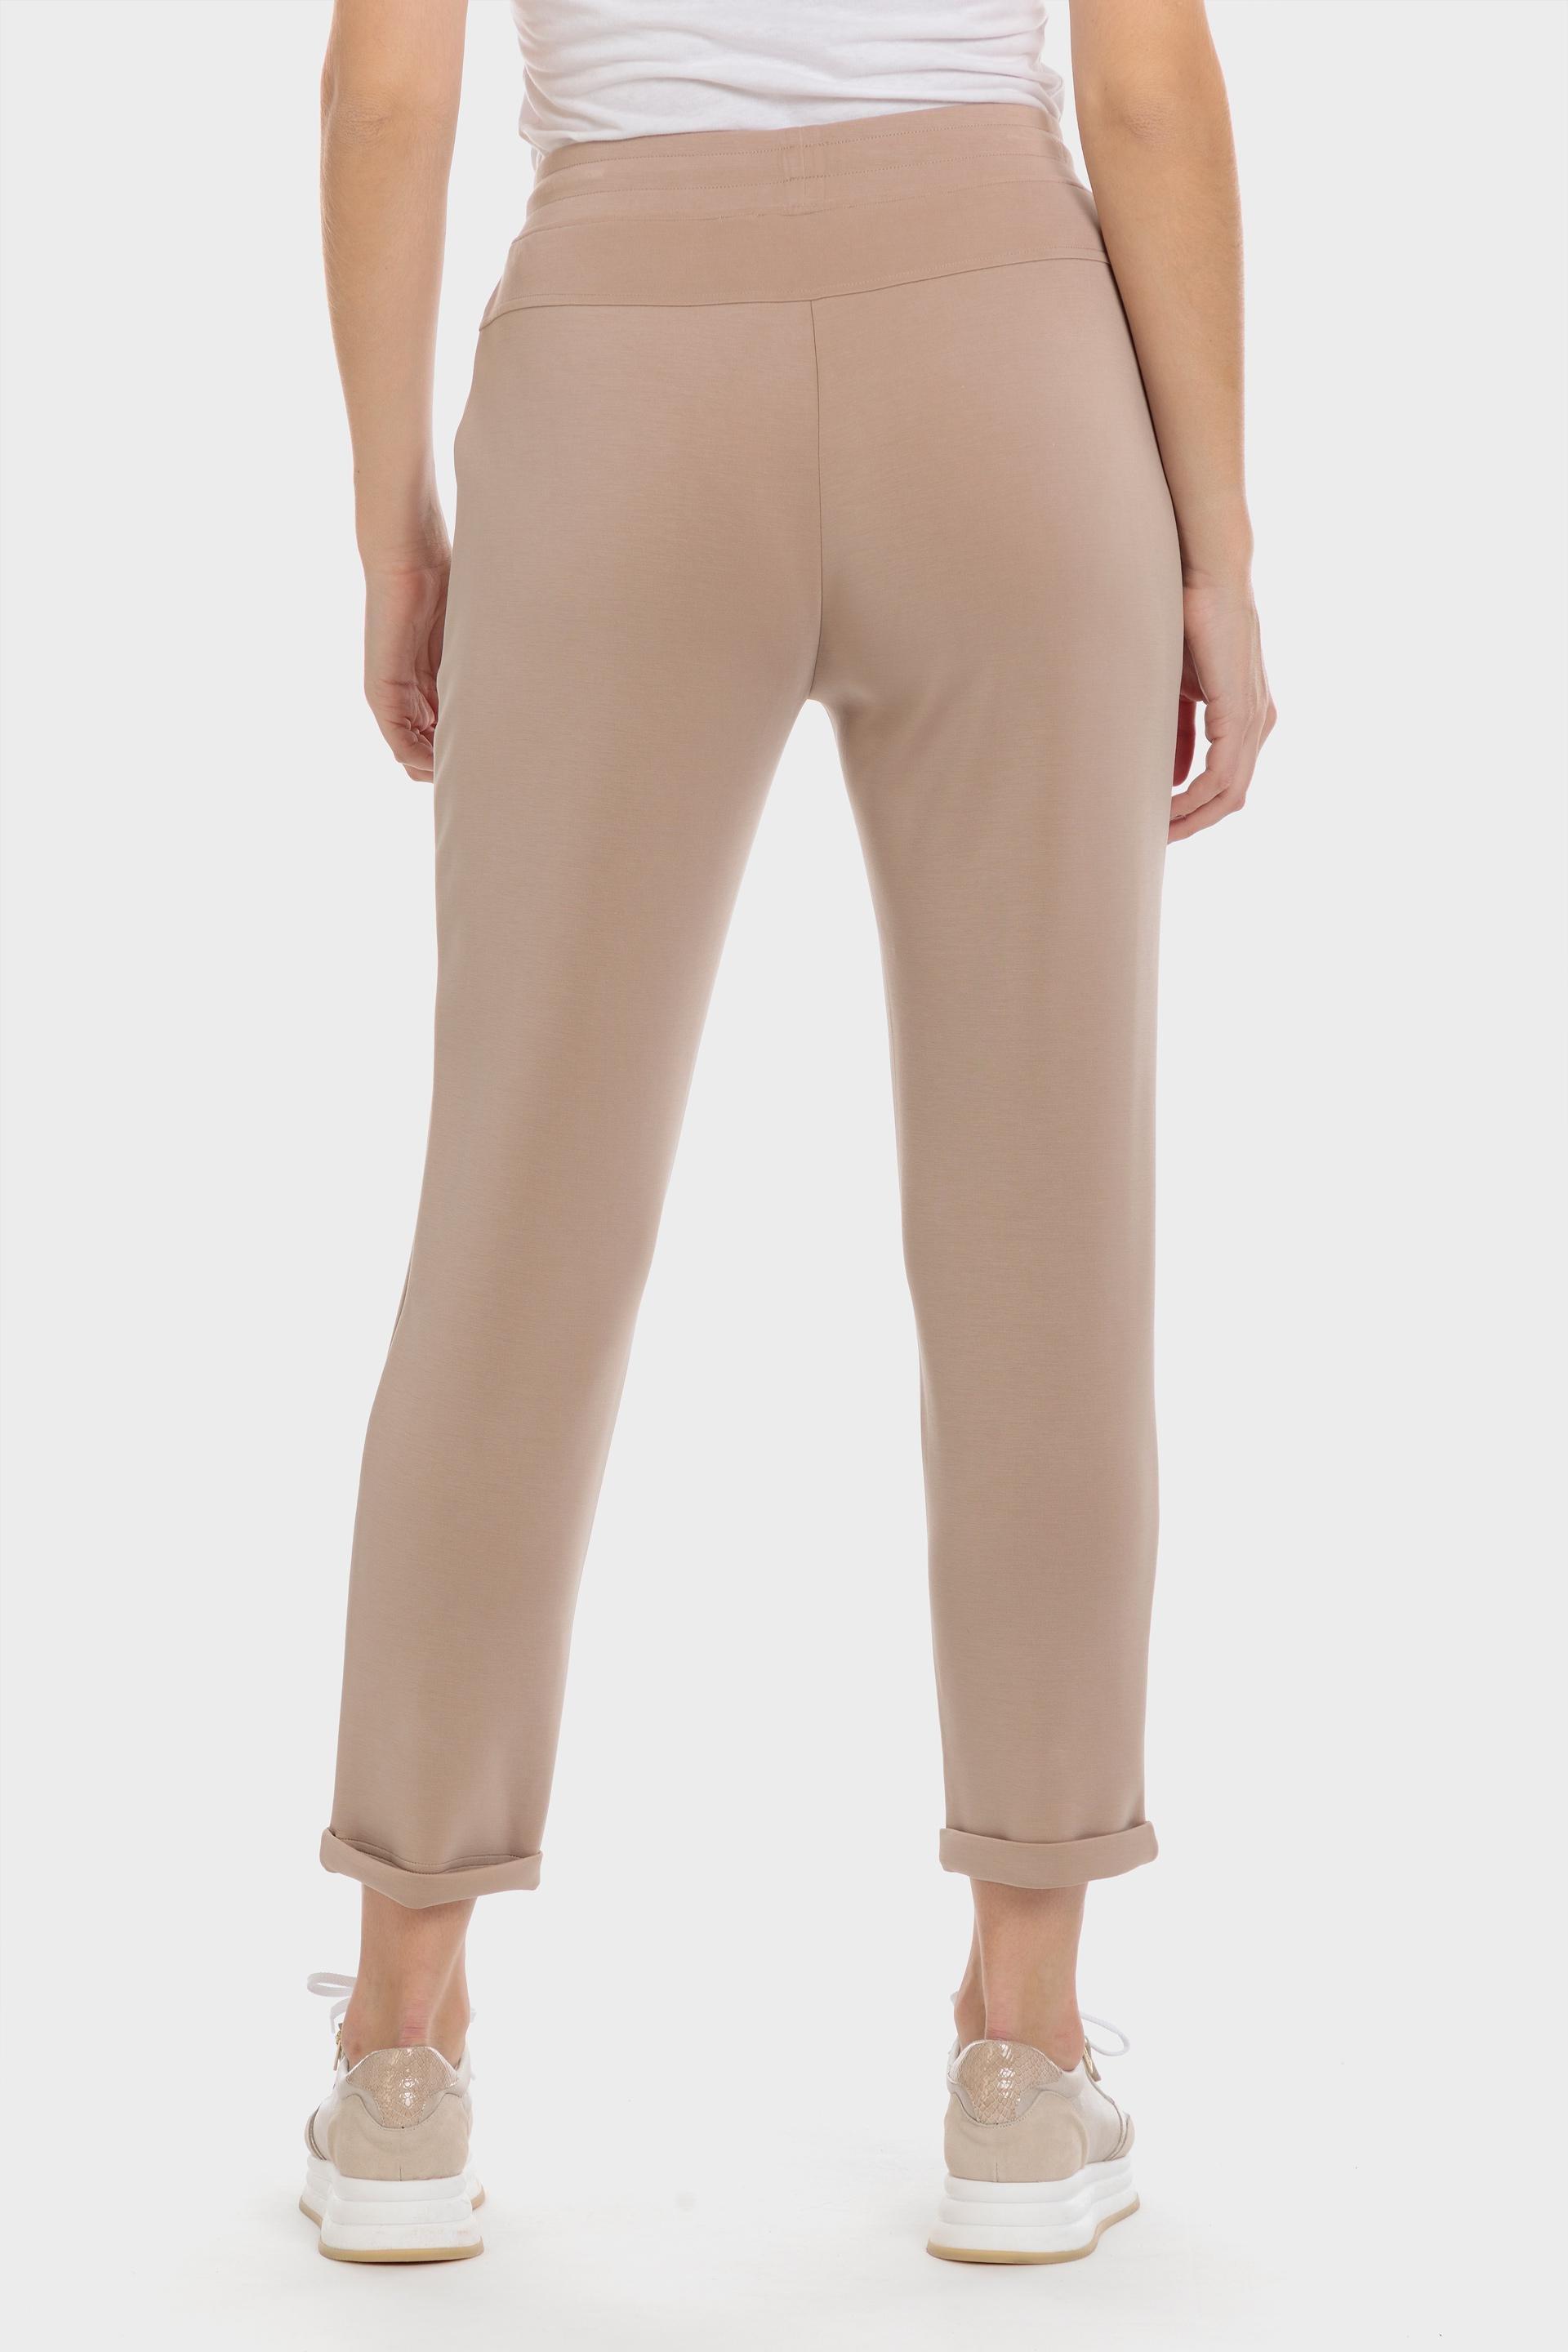 Punt Roma - Brown Comfy Trousers